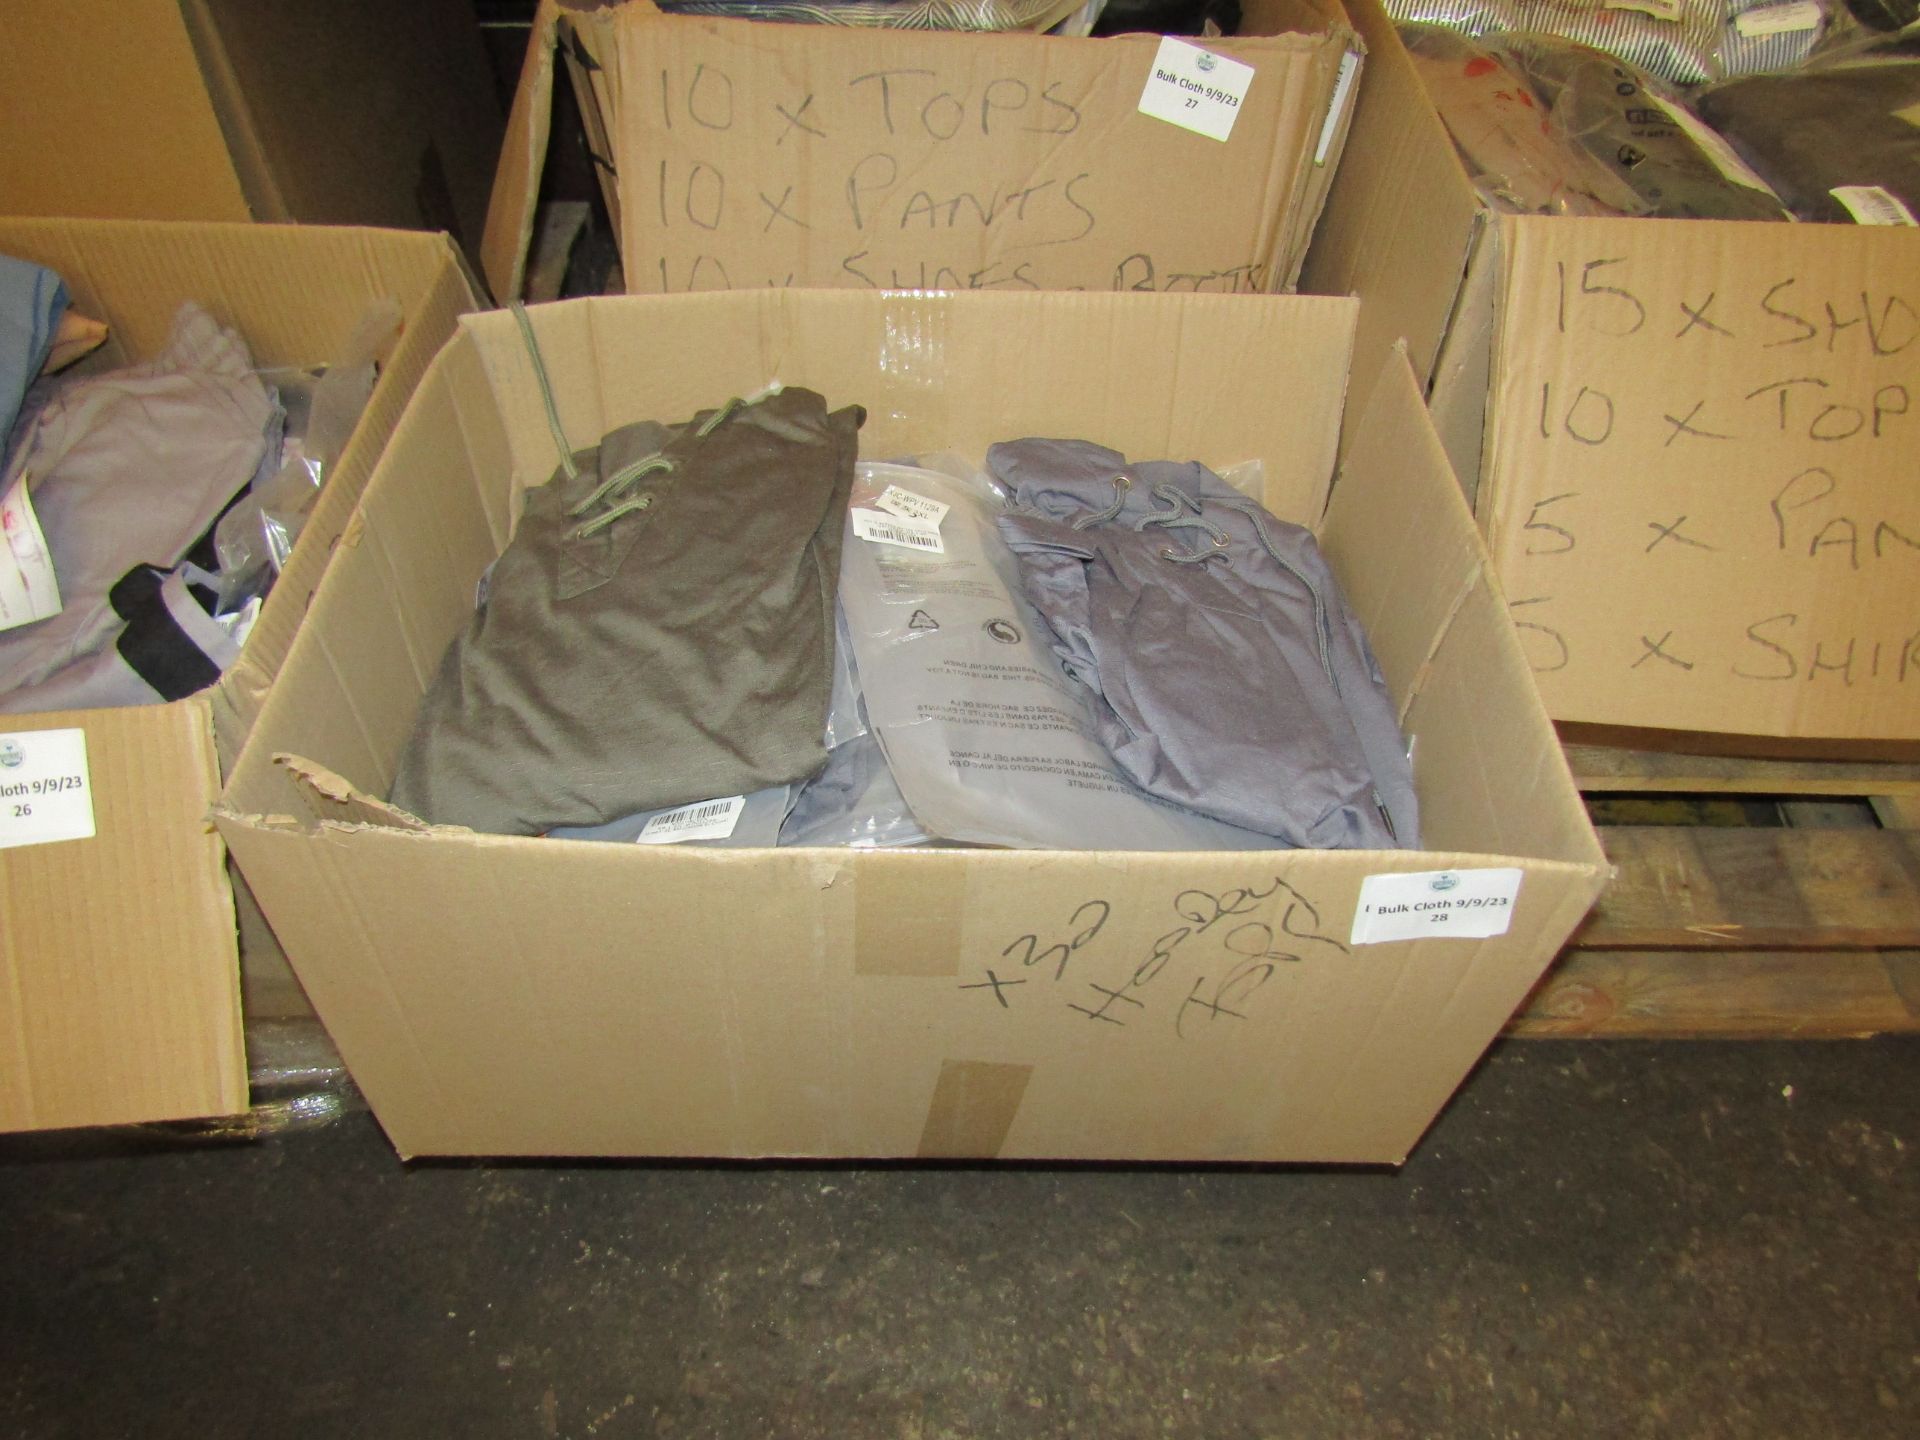 box of Mixed Amazon Shoes and and Clothing all new, consists of 30 pieces of clothing including tops